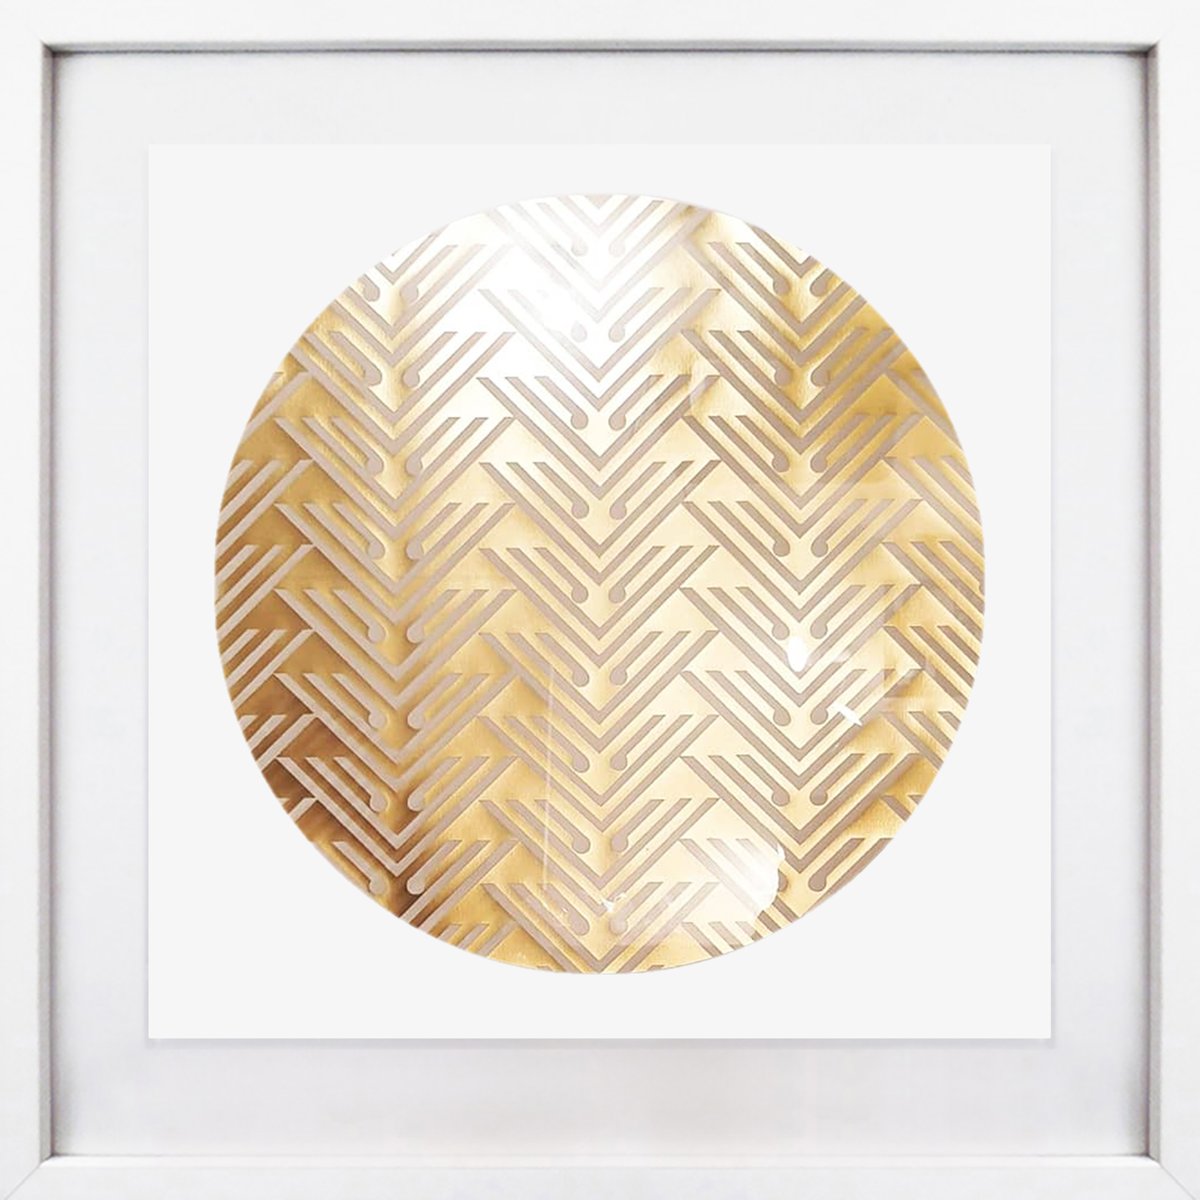 Image of 'Sentience'  Limited Edition gold foil screenprint